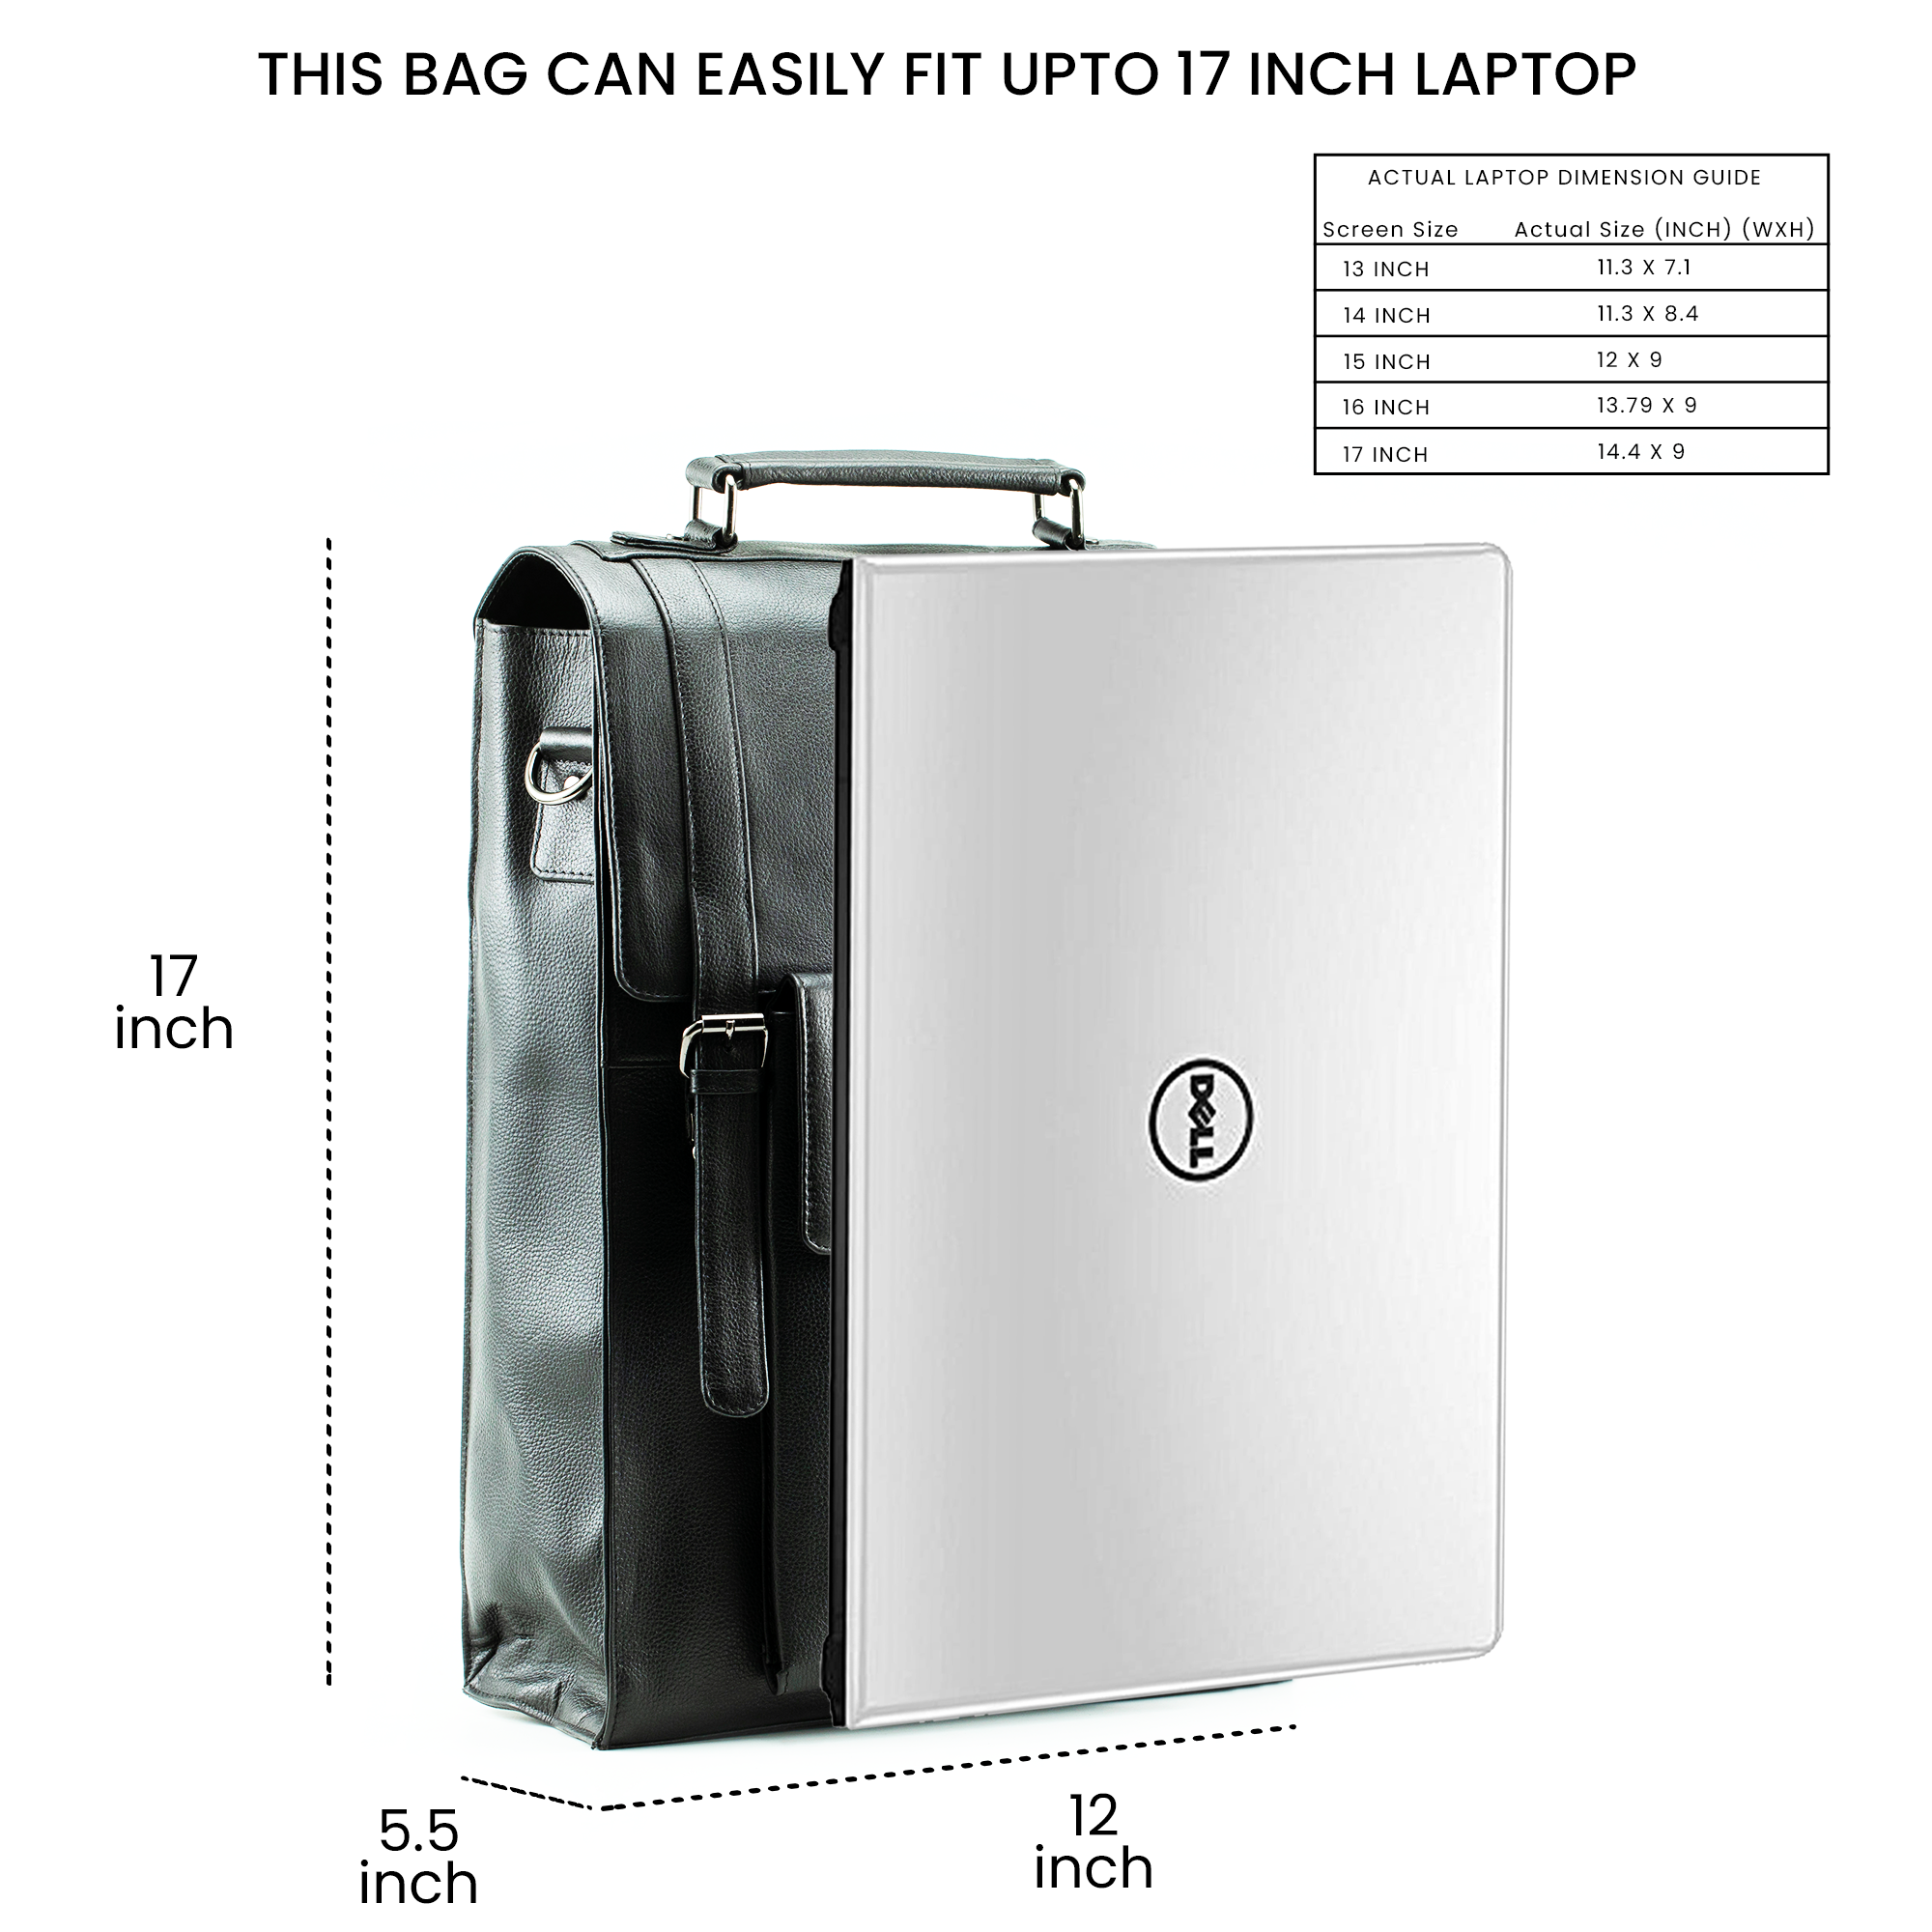 showing the size comparison of the bag with a laptop and size chart is provided for better comparison